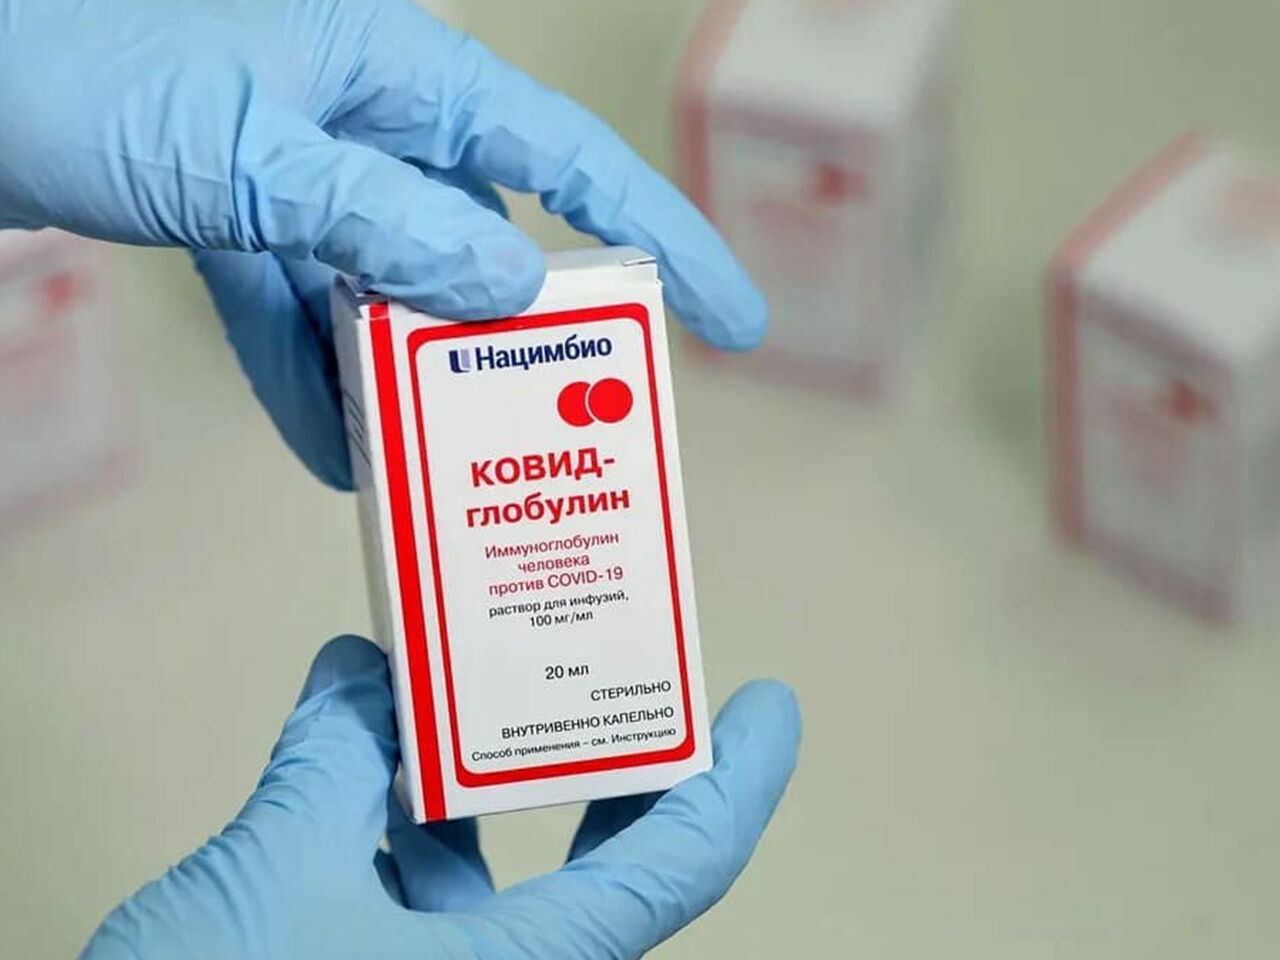 The Ministry of Health has registered the drug "COVID-globulin" on an ongoing basis